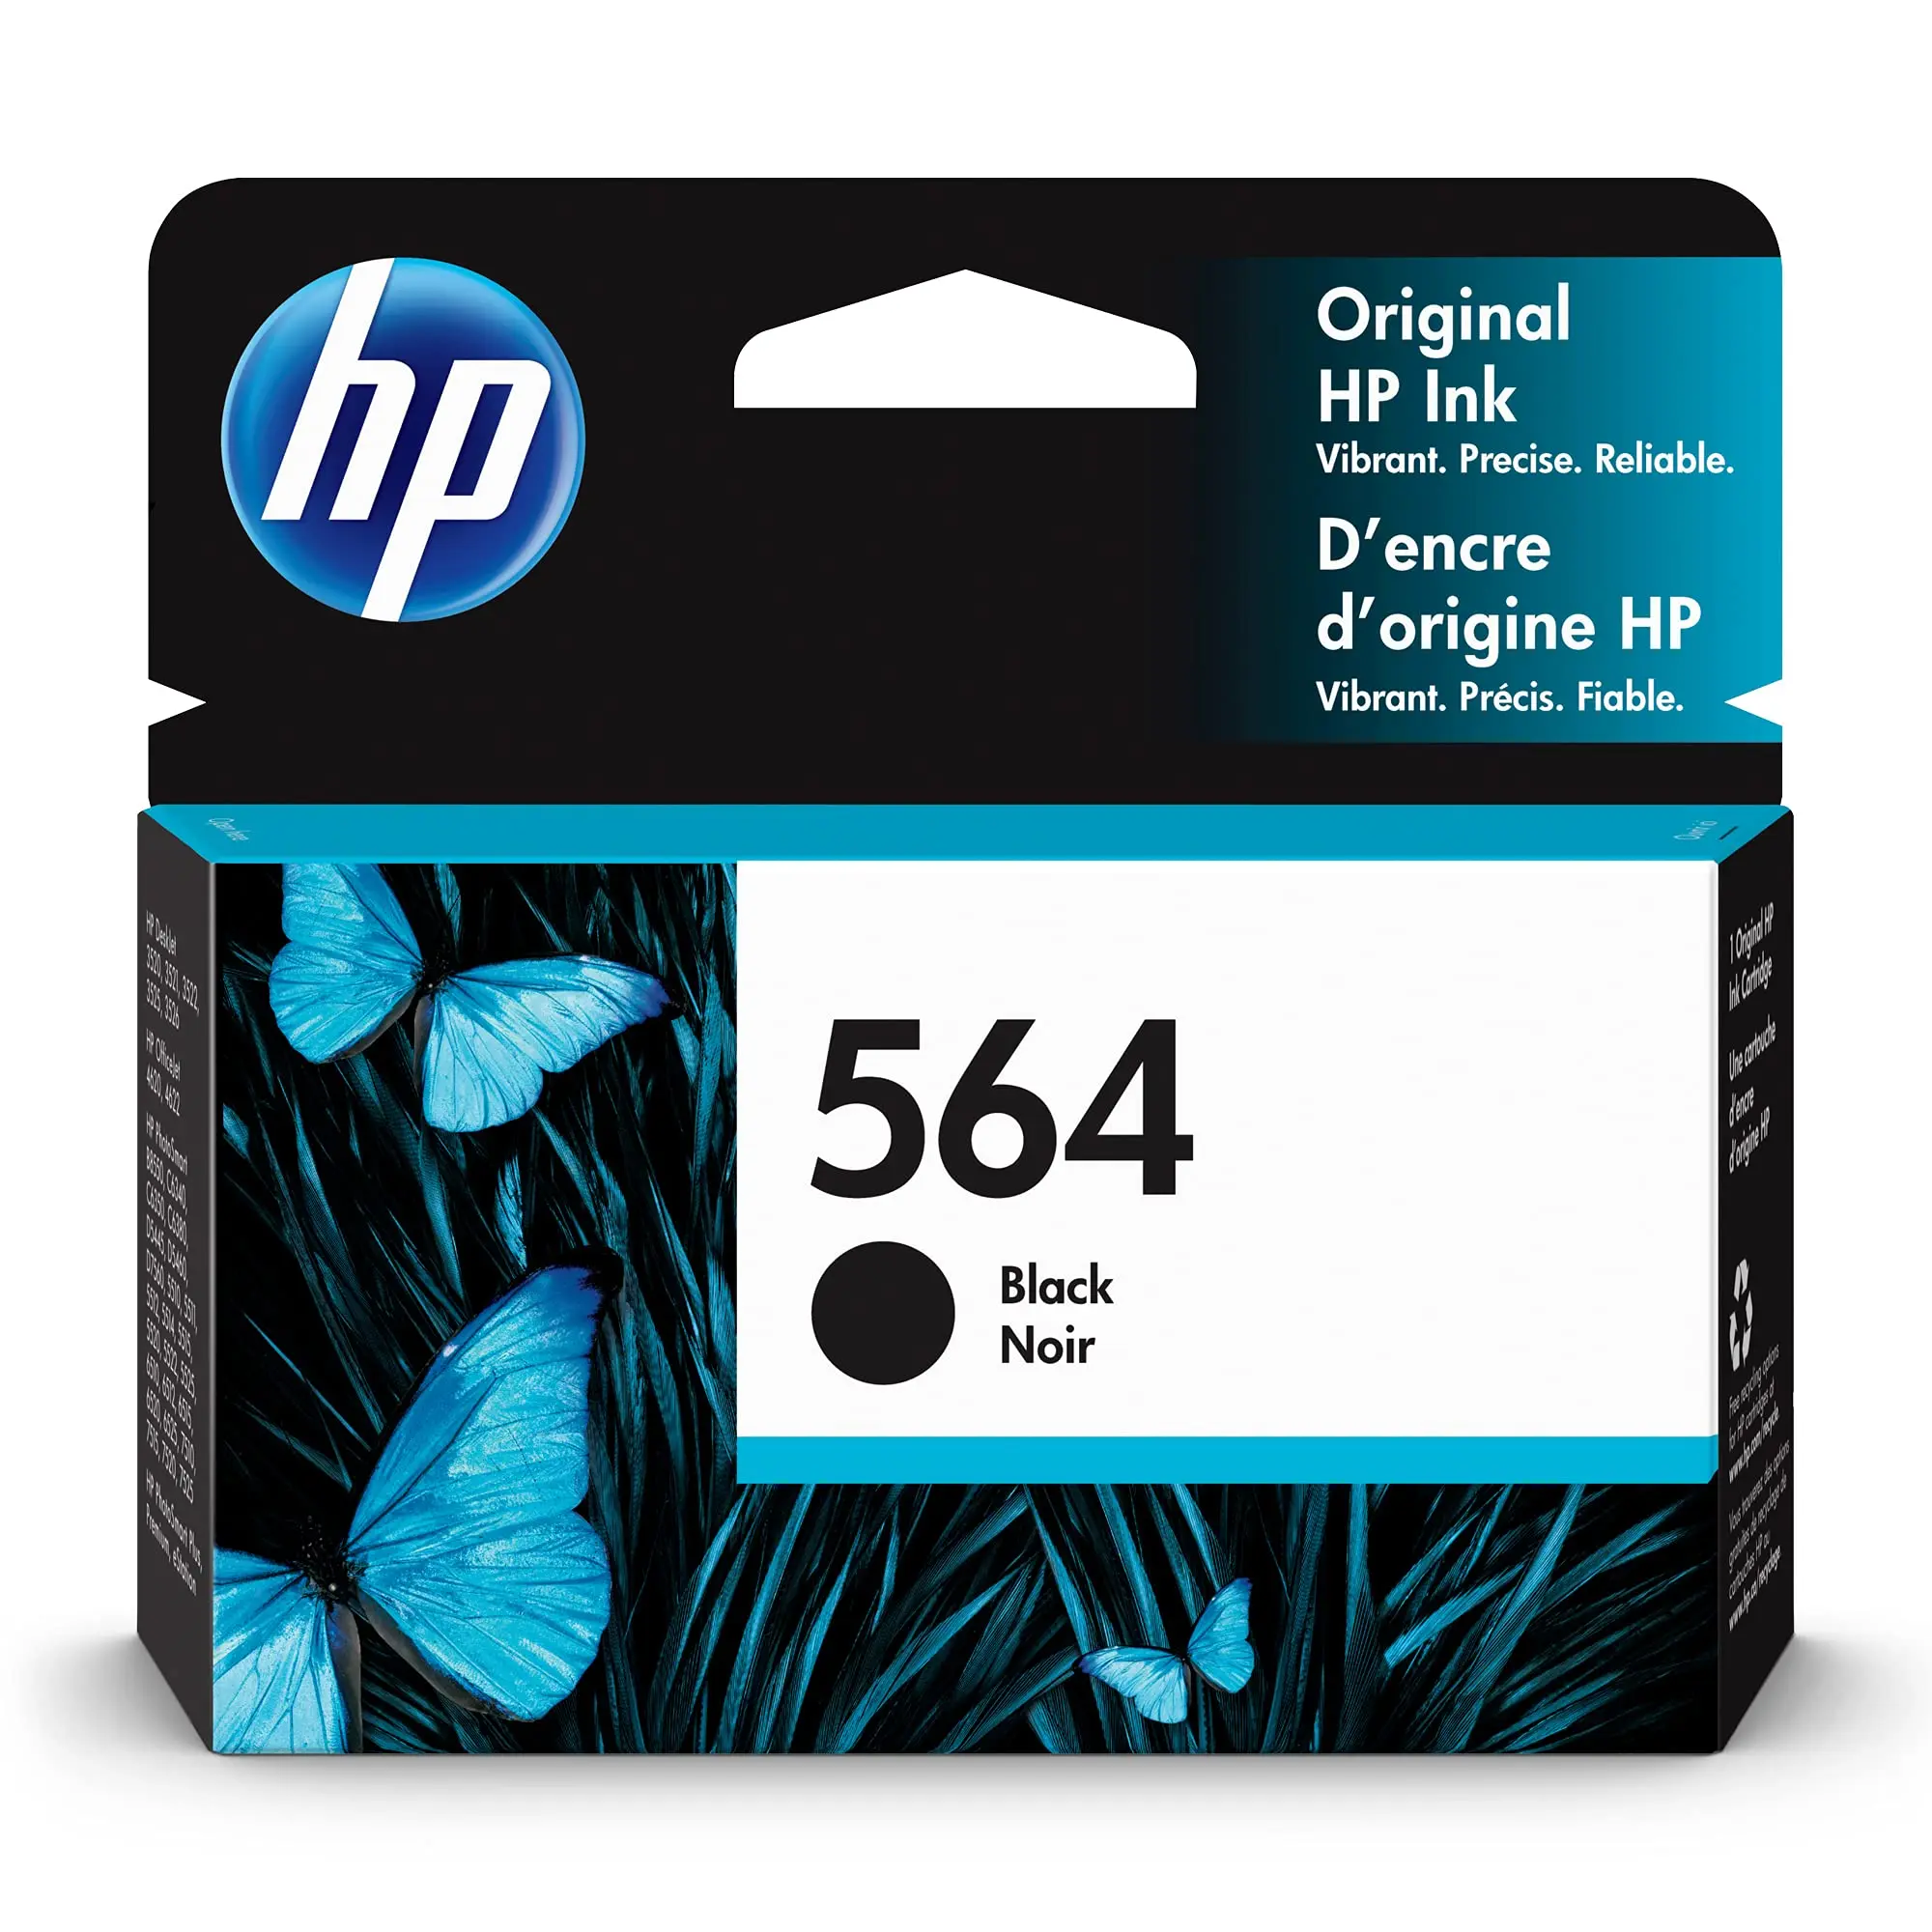 Hp 564 ink cartridges: compatibility, refill options, and benefits